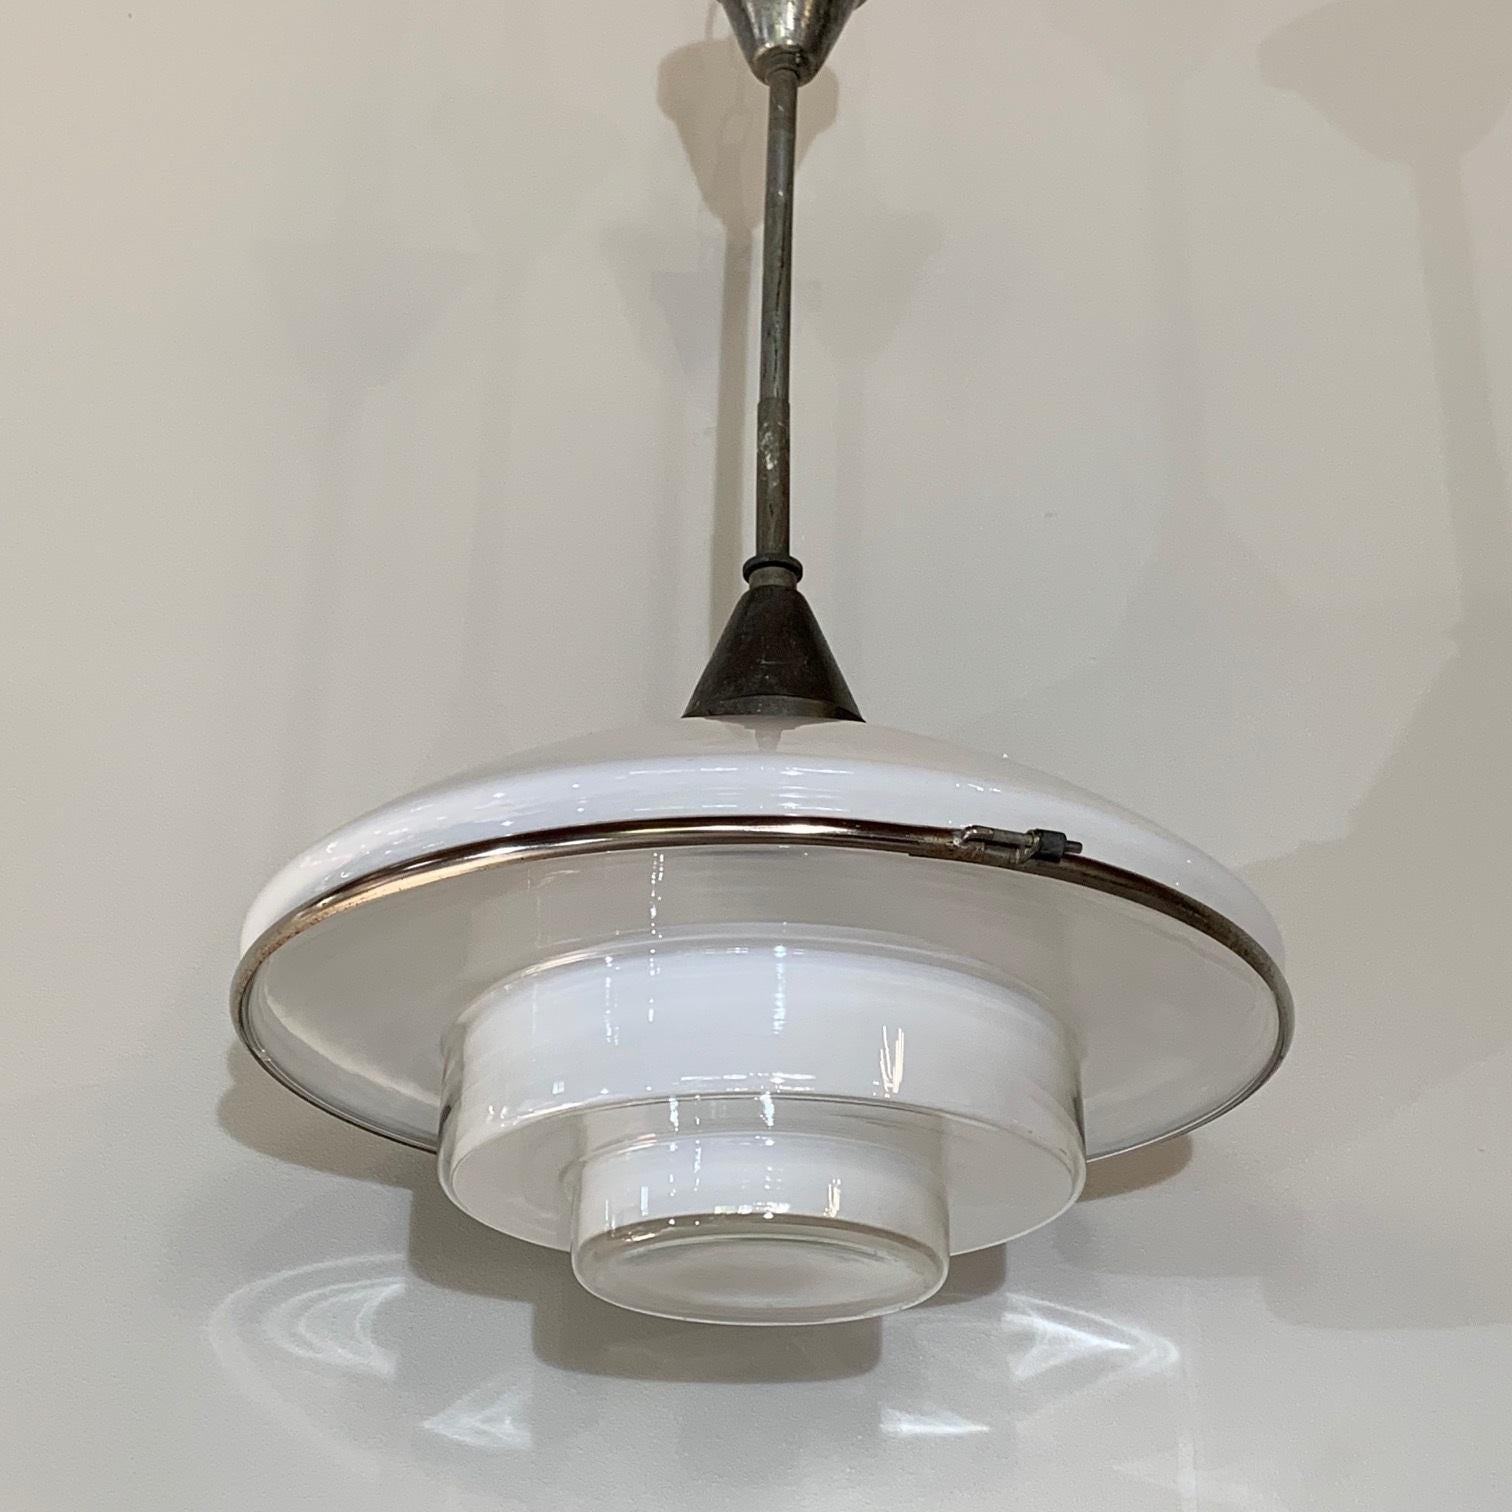 A pendant light by Otto Muller for Sistrah. 

P4 - 40 cm diameter version. 

Germany, circa 1931.

Composed of two main glass elements, a white opaline glass dome and an inverted ziggurat shaped opaline glass shade. Chrome-plated belt.